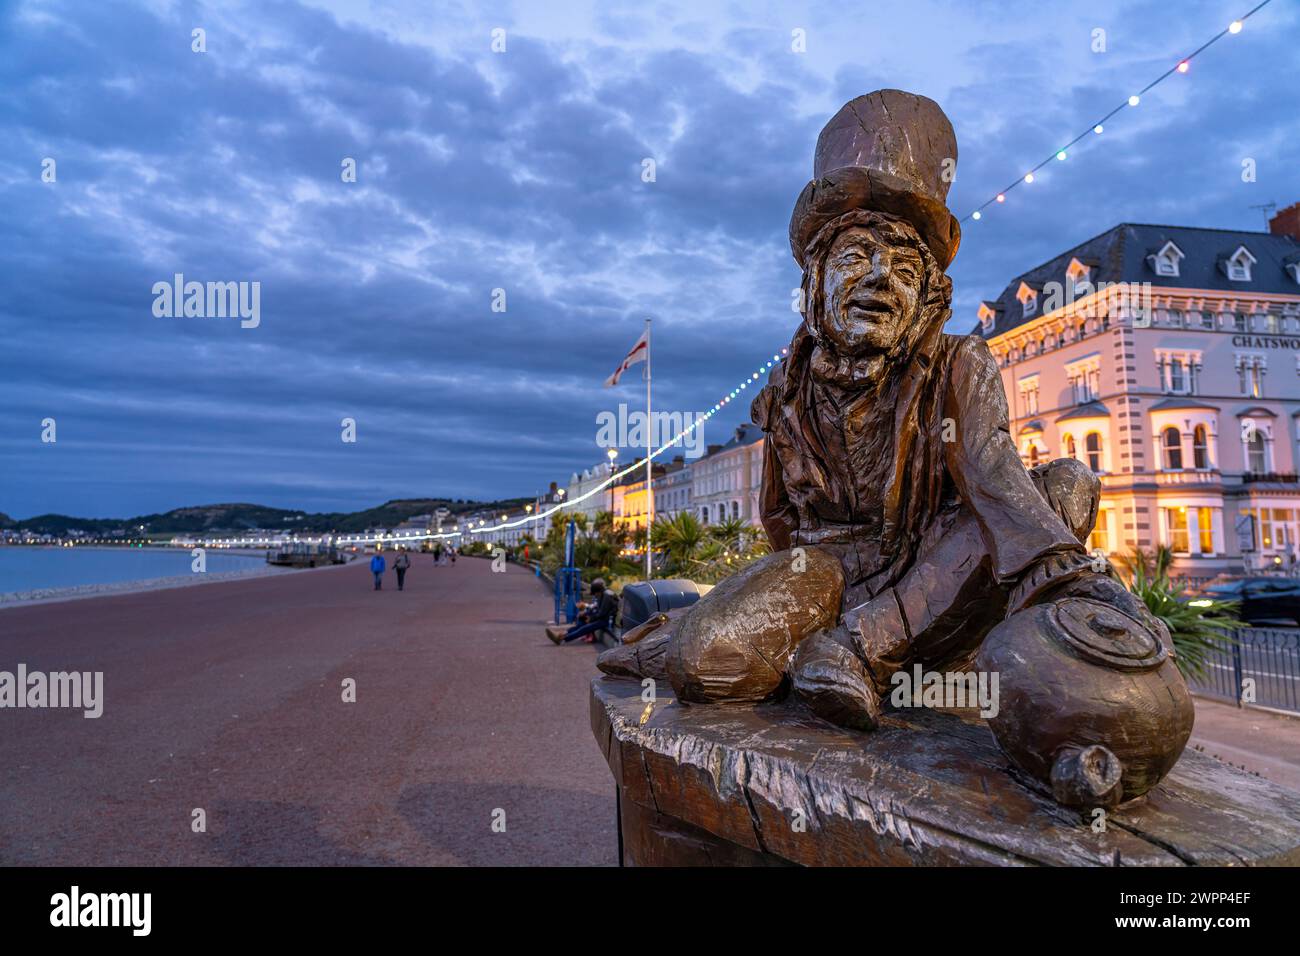 Sculpture of the Mad Hatter or The Mad Hatter from Alice in Wonderland on the promenade of the seaside resort of Llandudno at dusk, Wales, Great Britain, Europe Stock Photo